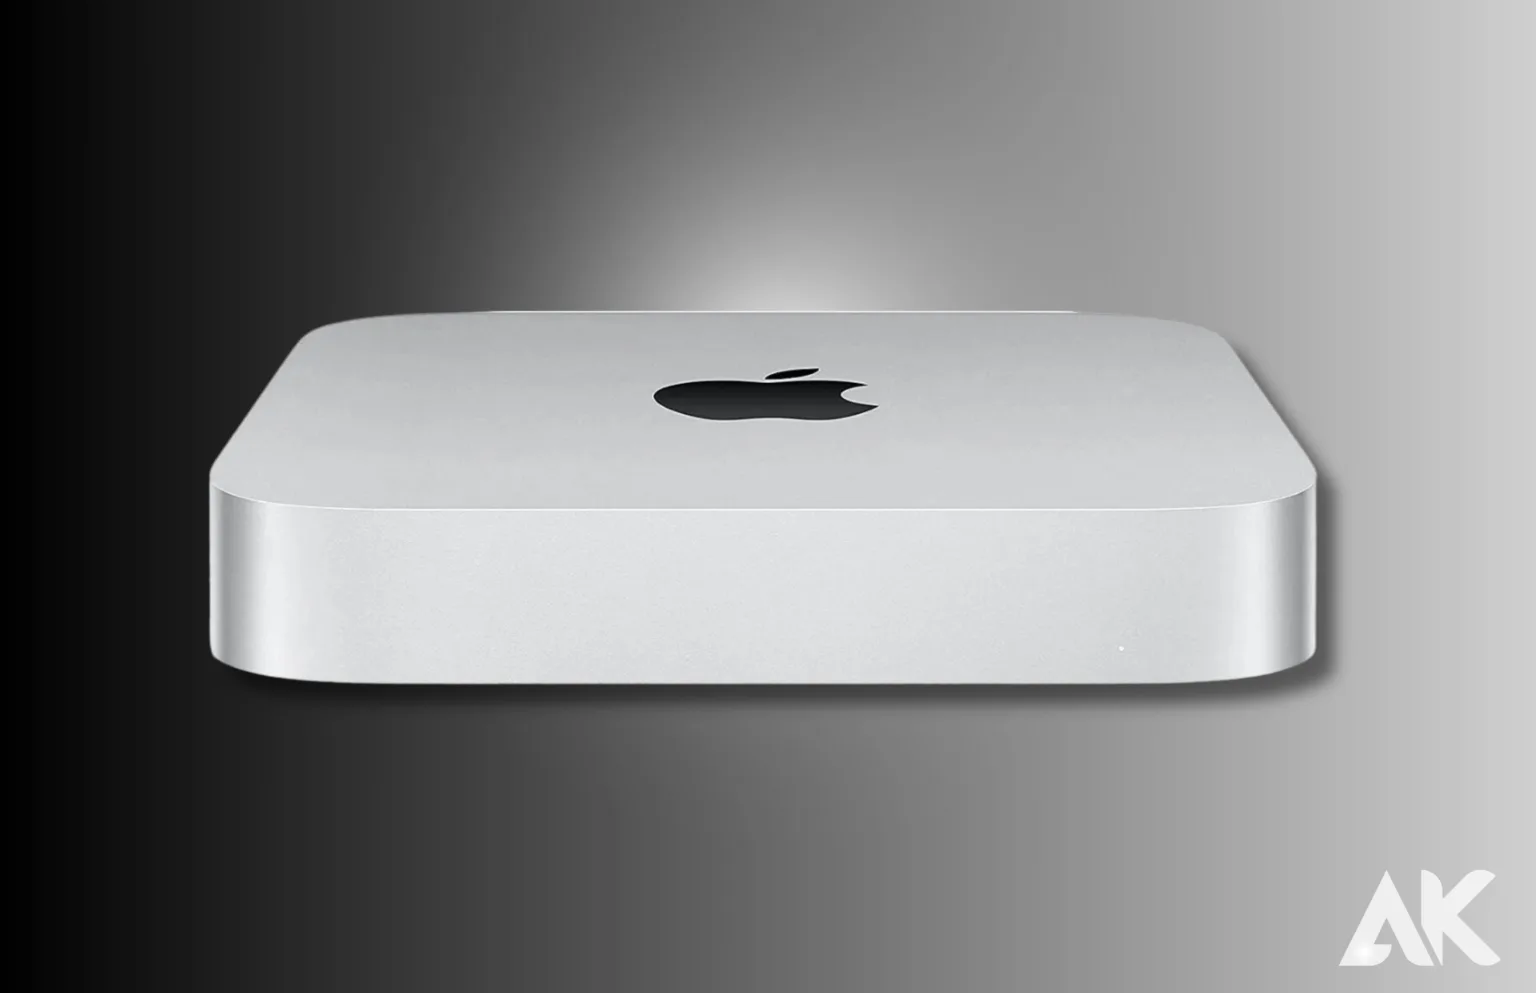 Mac mini a1347 Specifications - Complete Guide